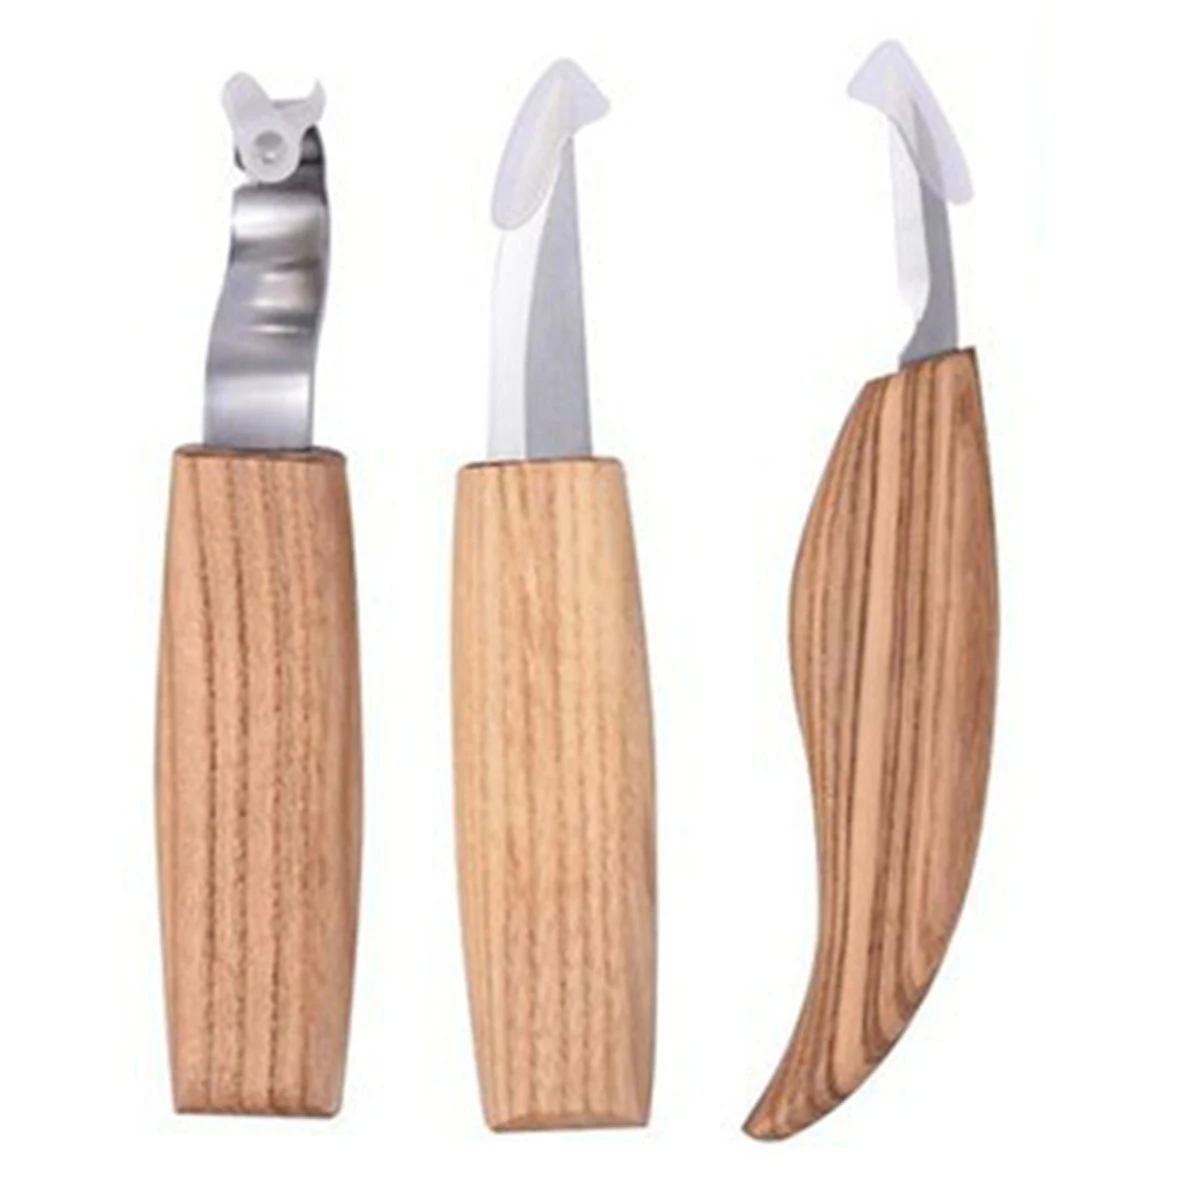 3-in-1 Wood Carving Tools Set for Woodworking Carving Hook Knife Whittling Knife Detail Chip Carving Knife Wood